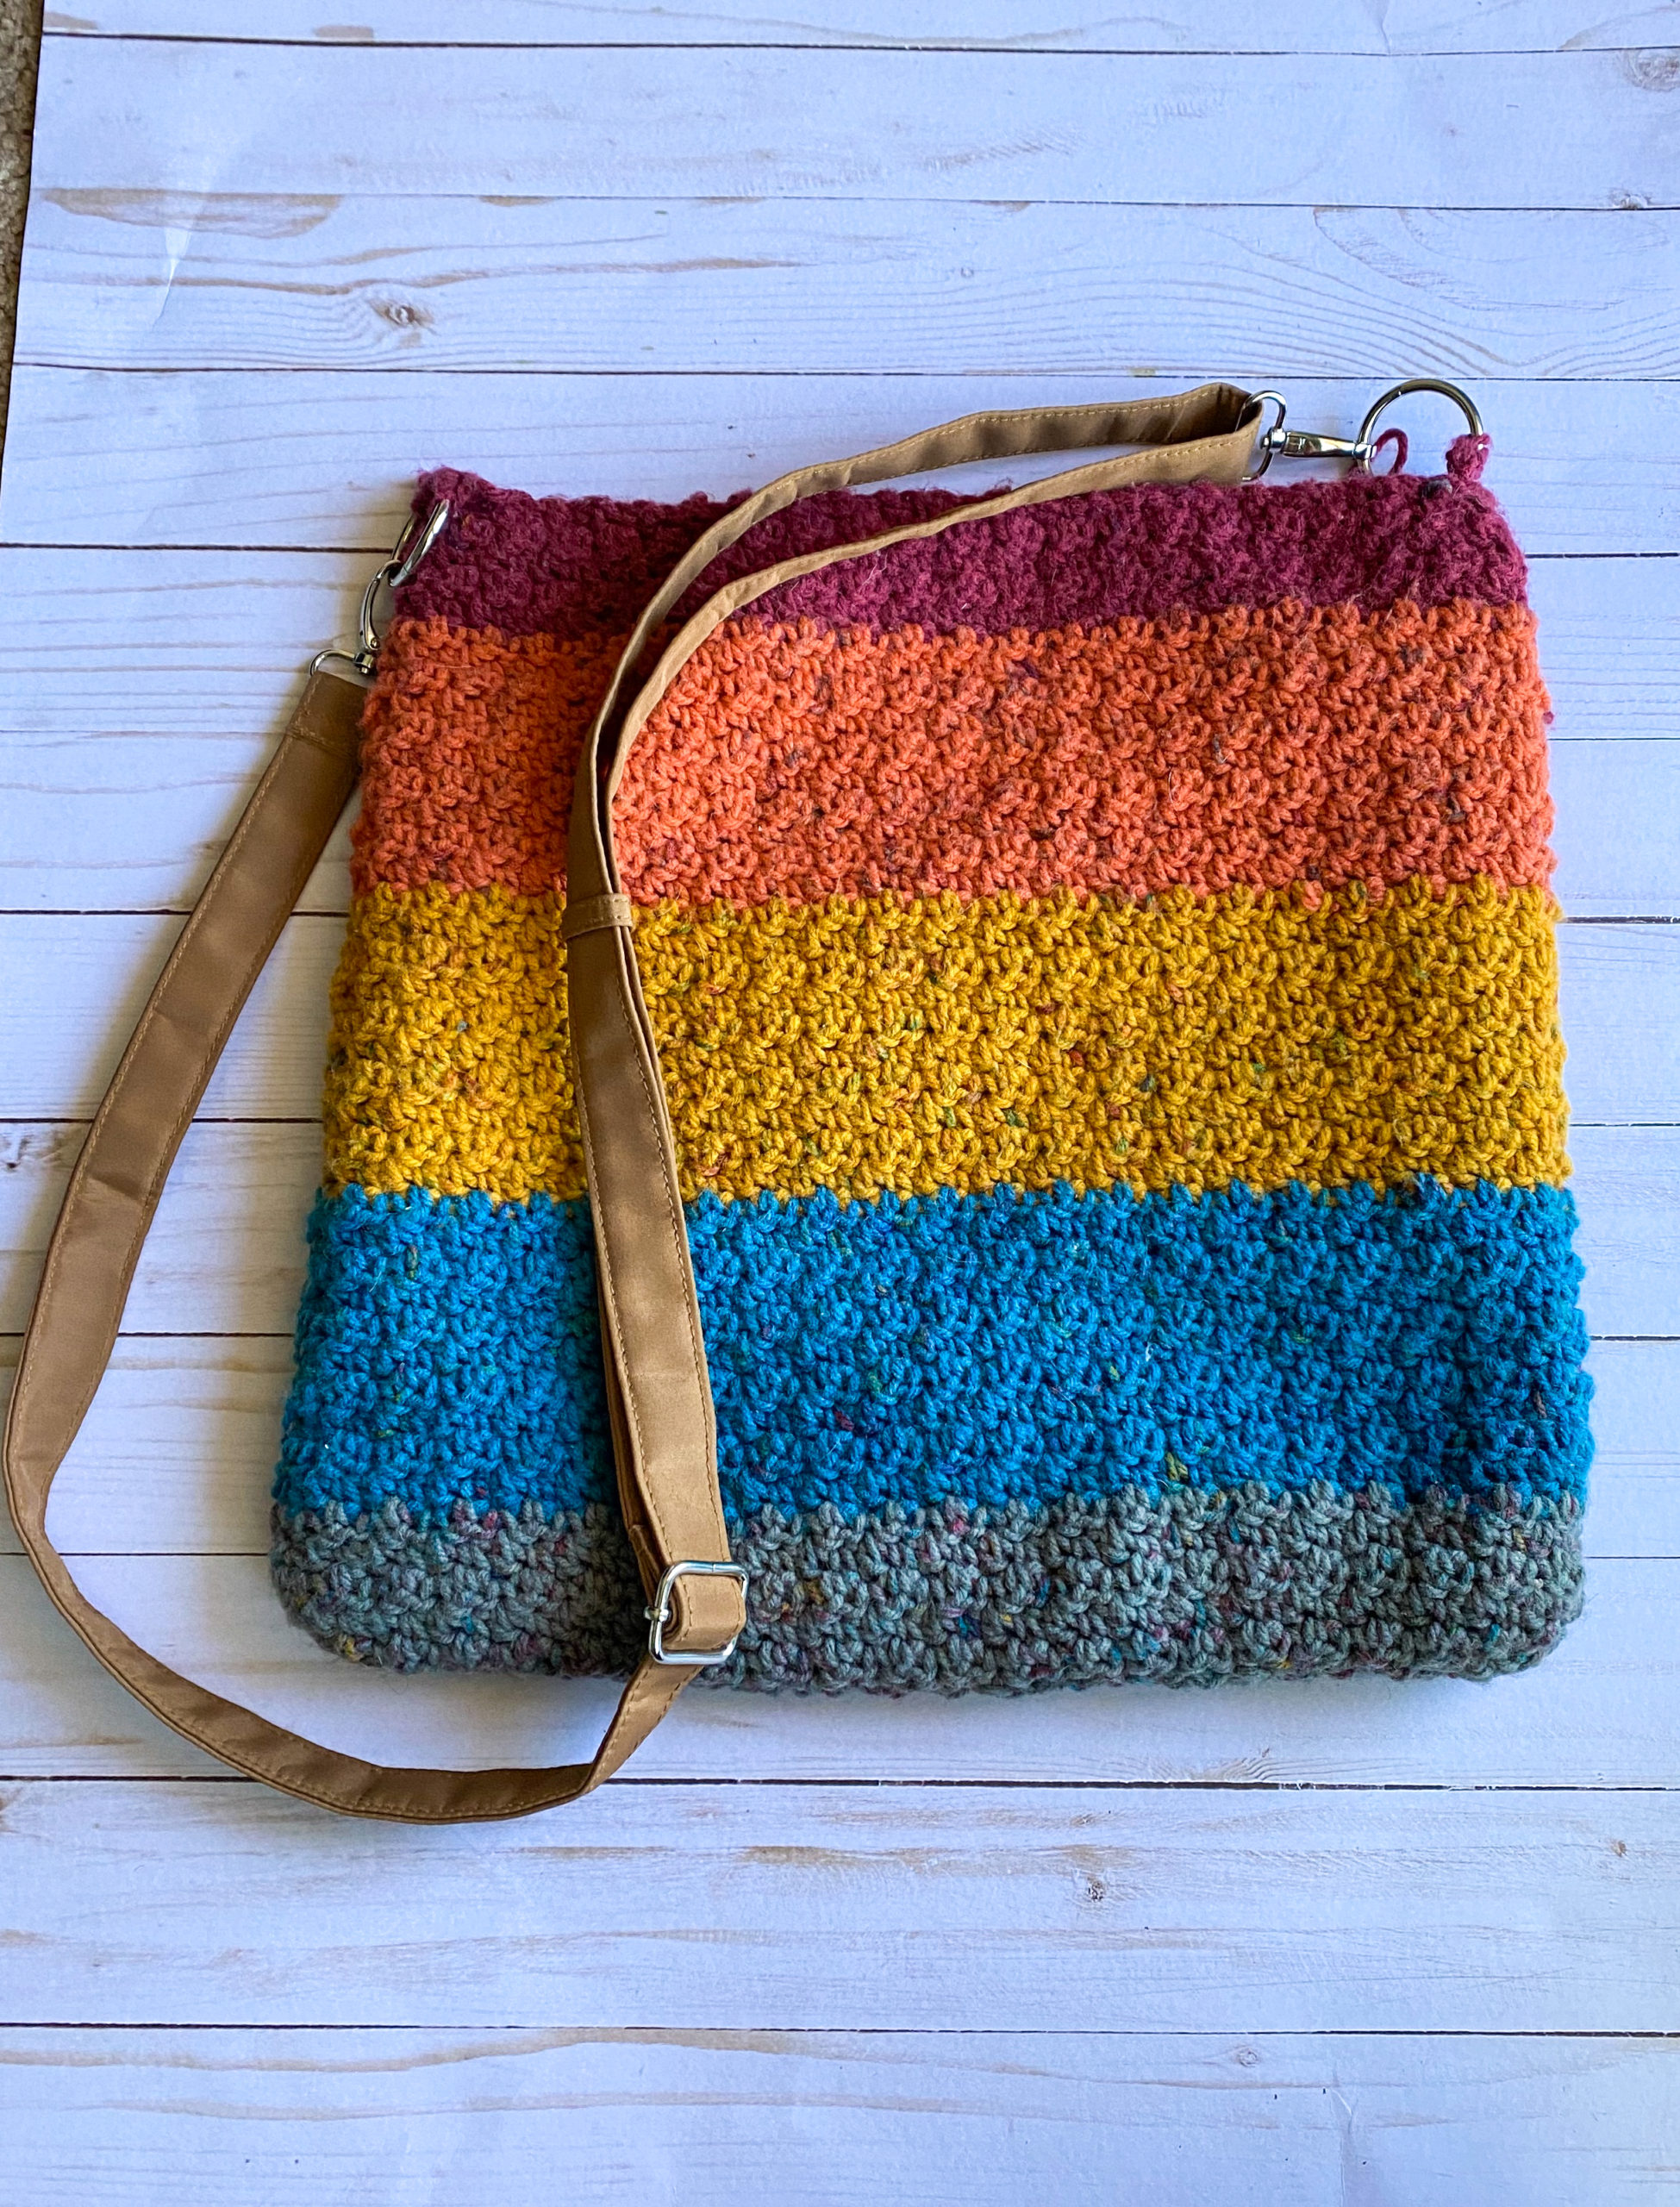 Easy Granny Square Tote Bag (with lining!) FREE pattern - Pukapuka